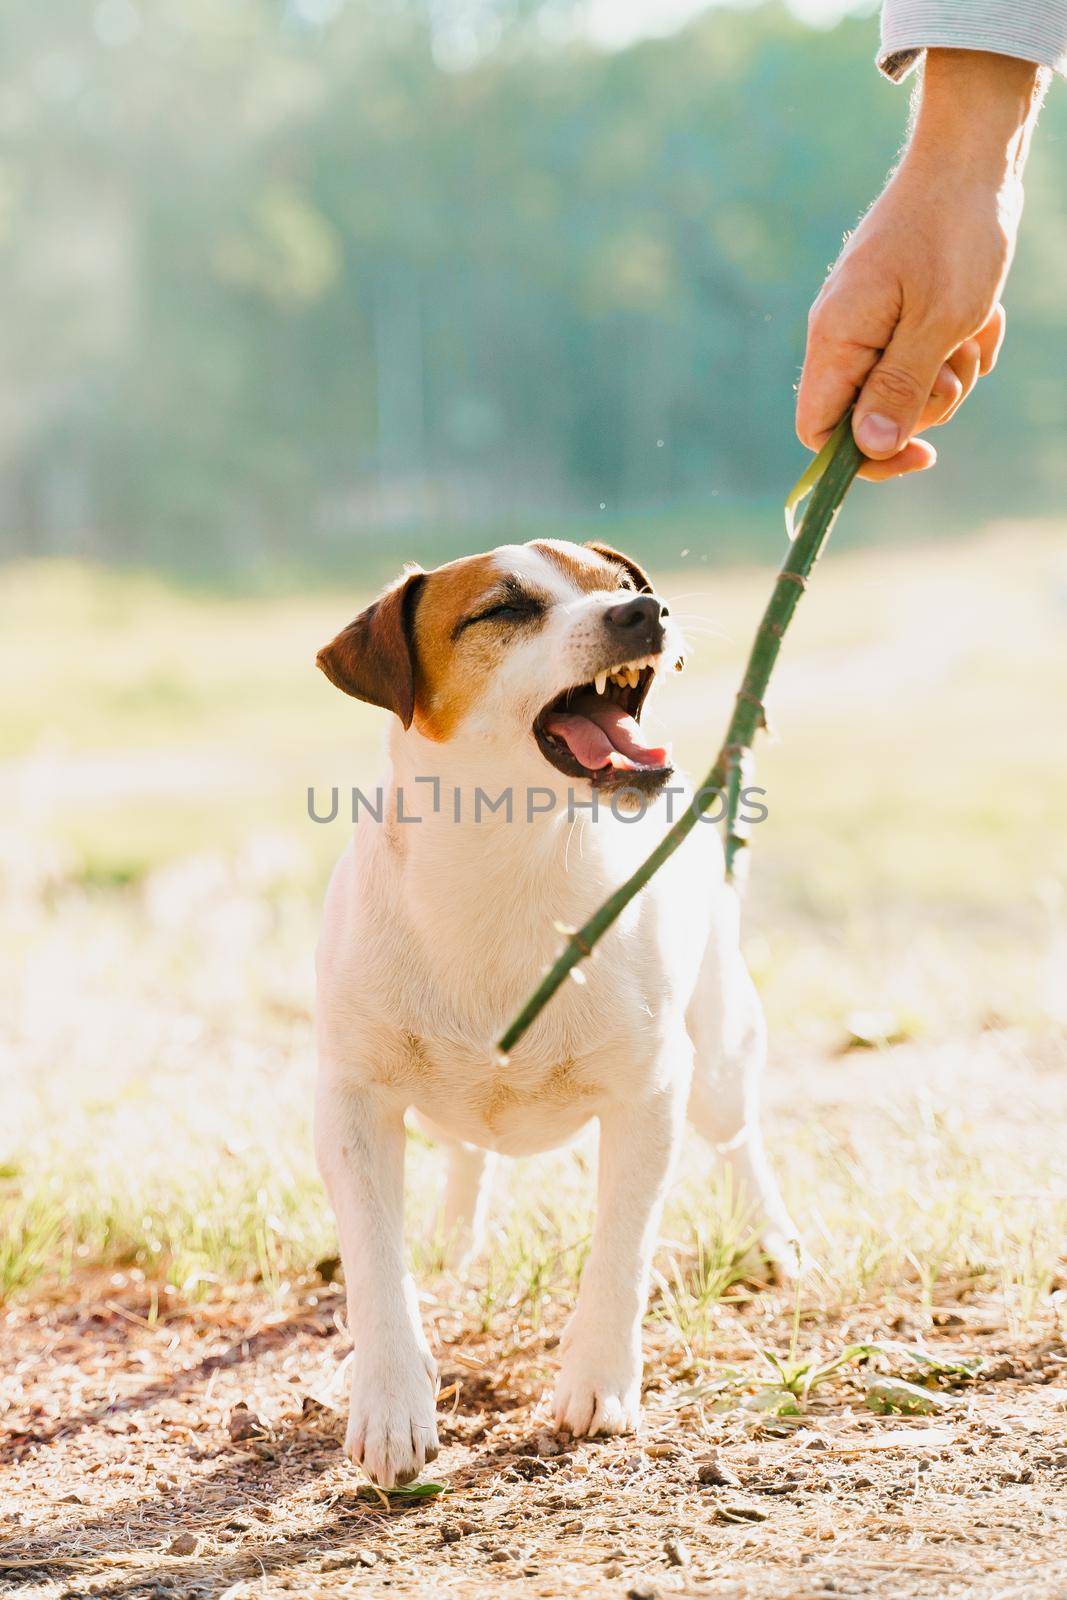 Jack russell terrier barks. Dog plays with wooden stick. People and pets by Rabizo